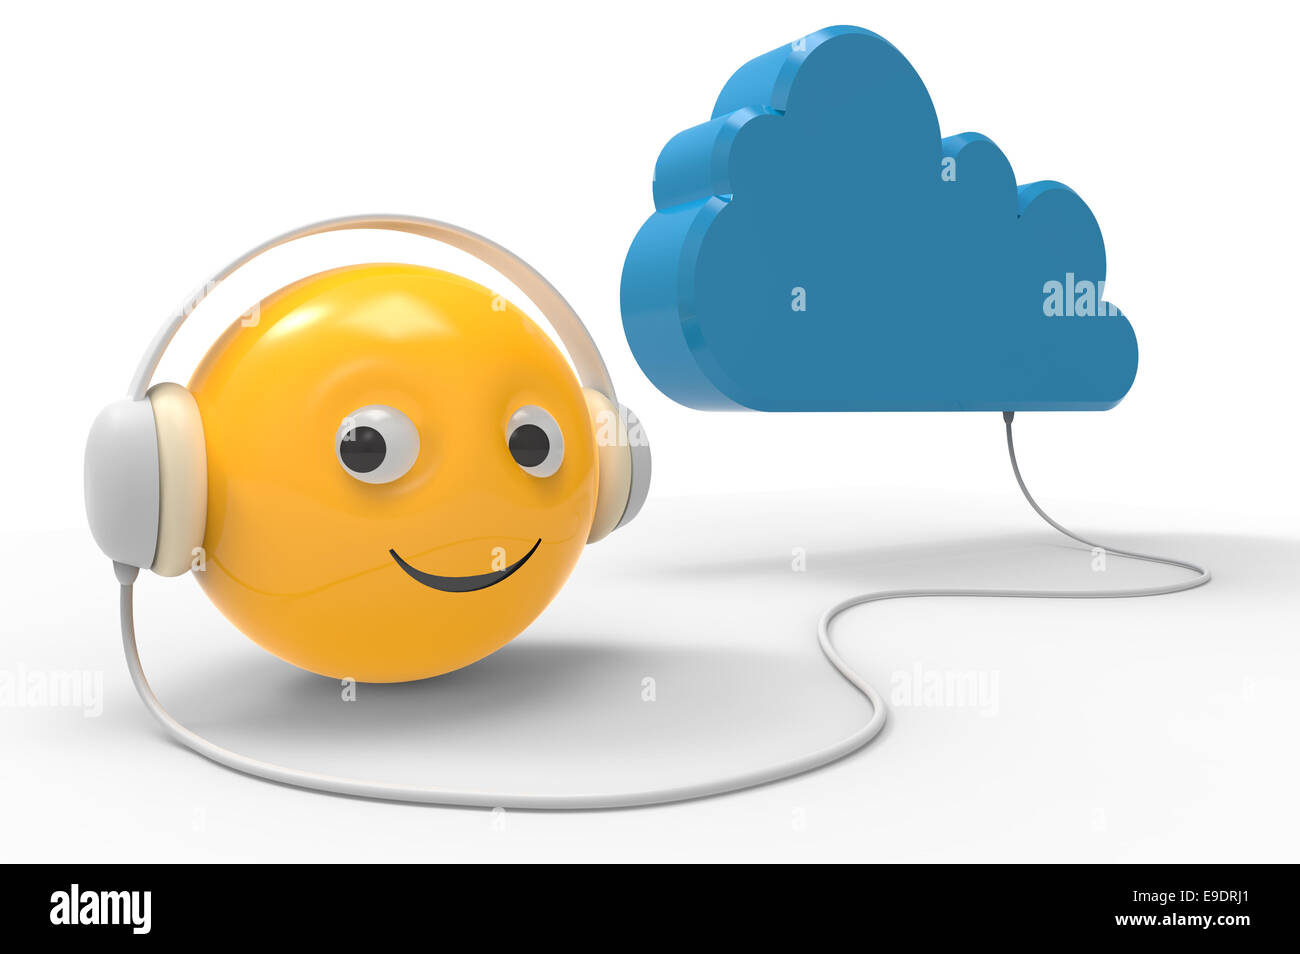 3D scene displayed computer cloud storage technology in symbolic form Stock Photo